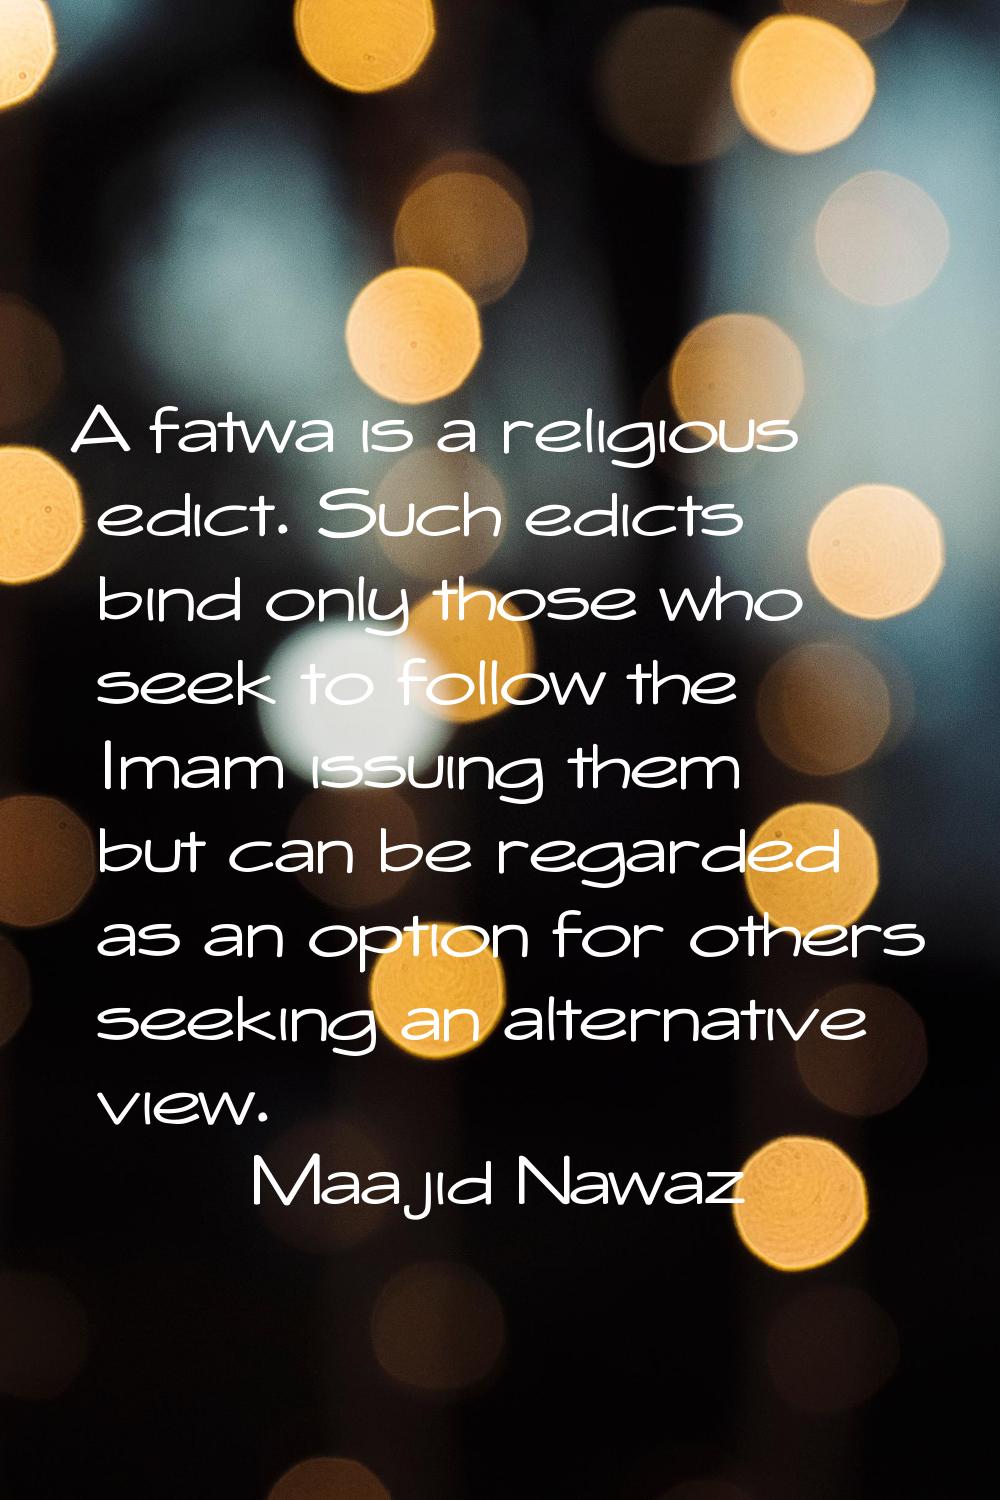 A fatwa is a religious edict. Such edicts bind only those who seek to follow the Imam issuing them 